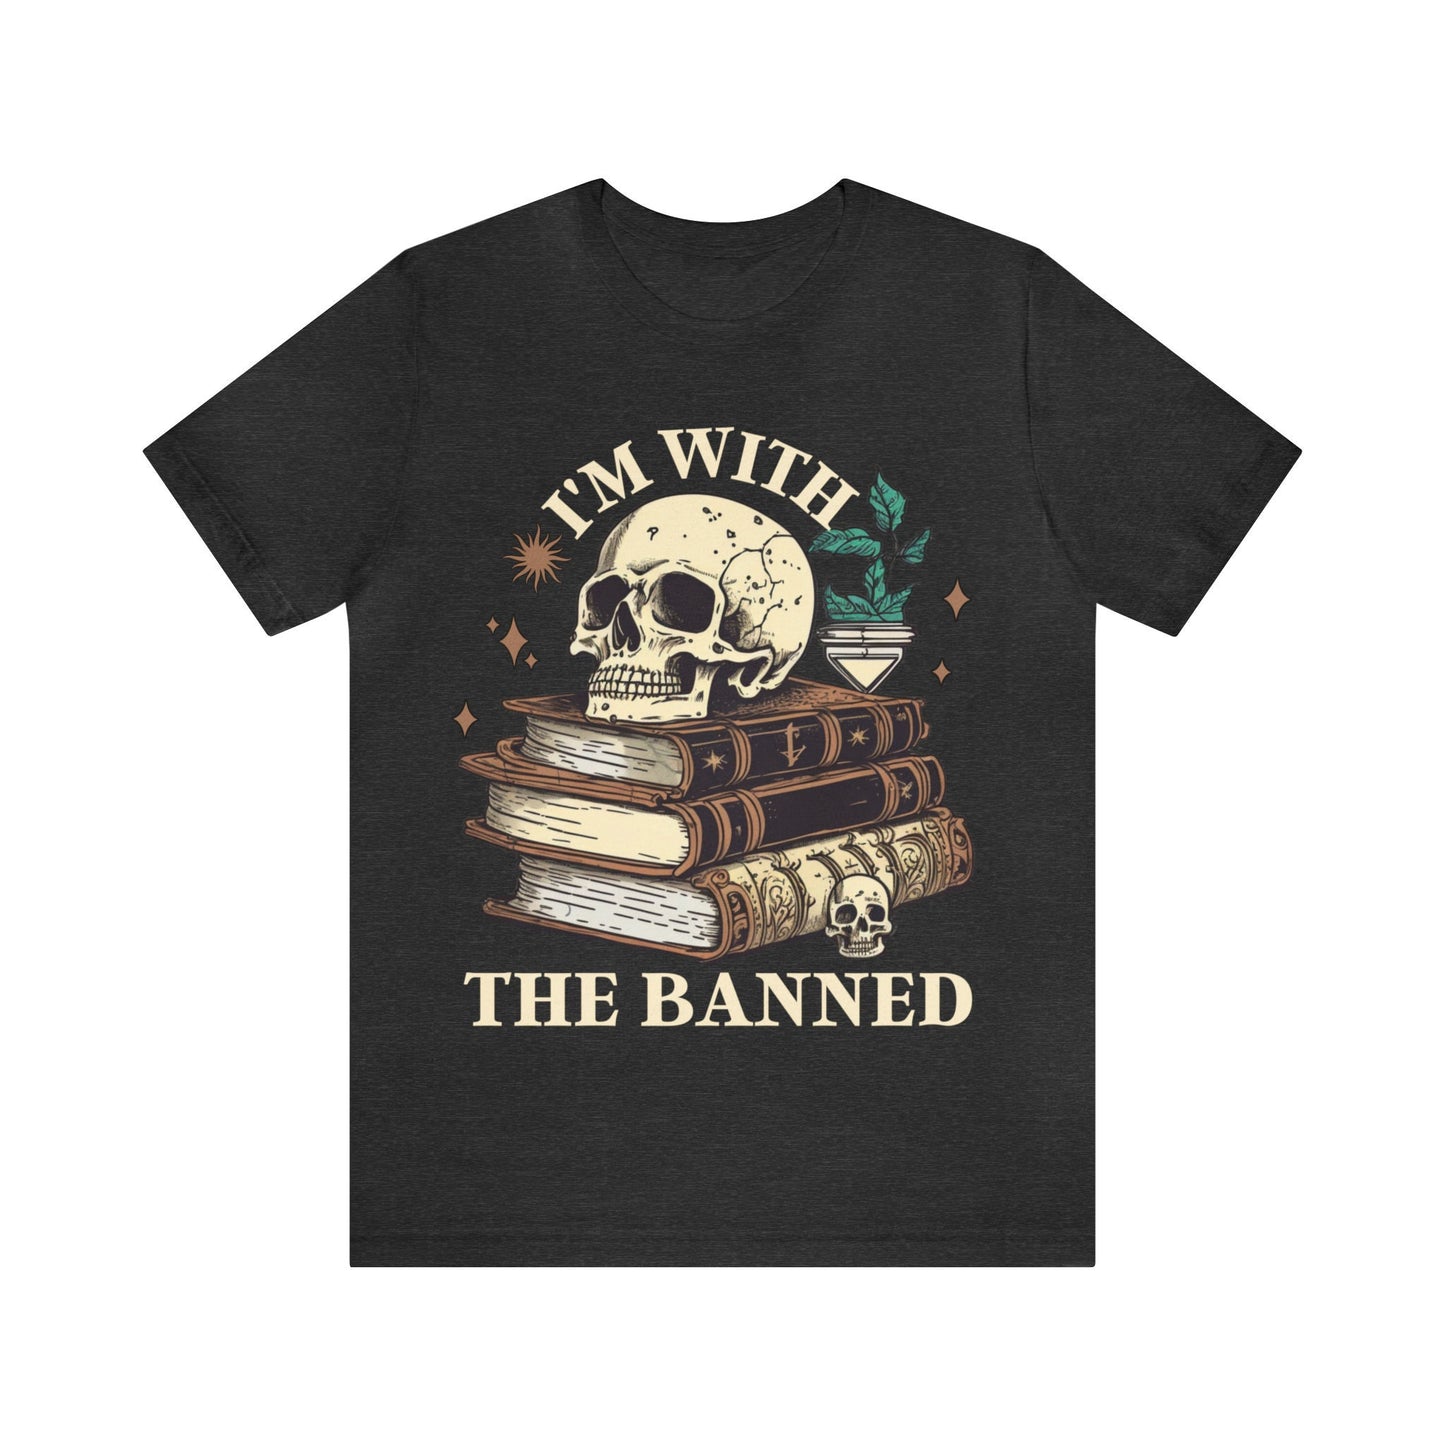 I'm with the banned shirt